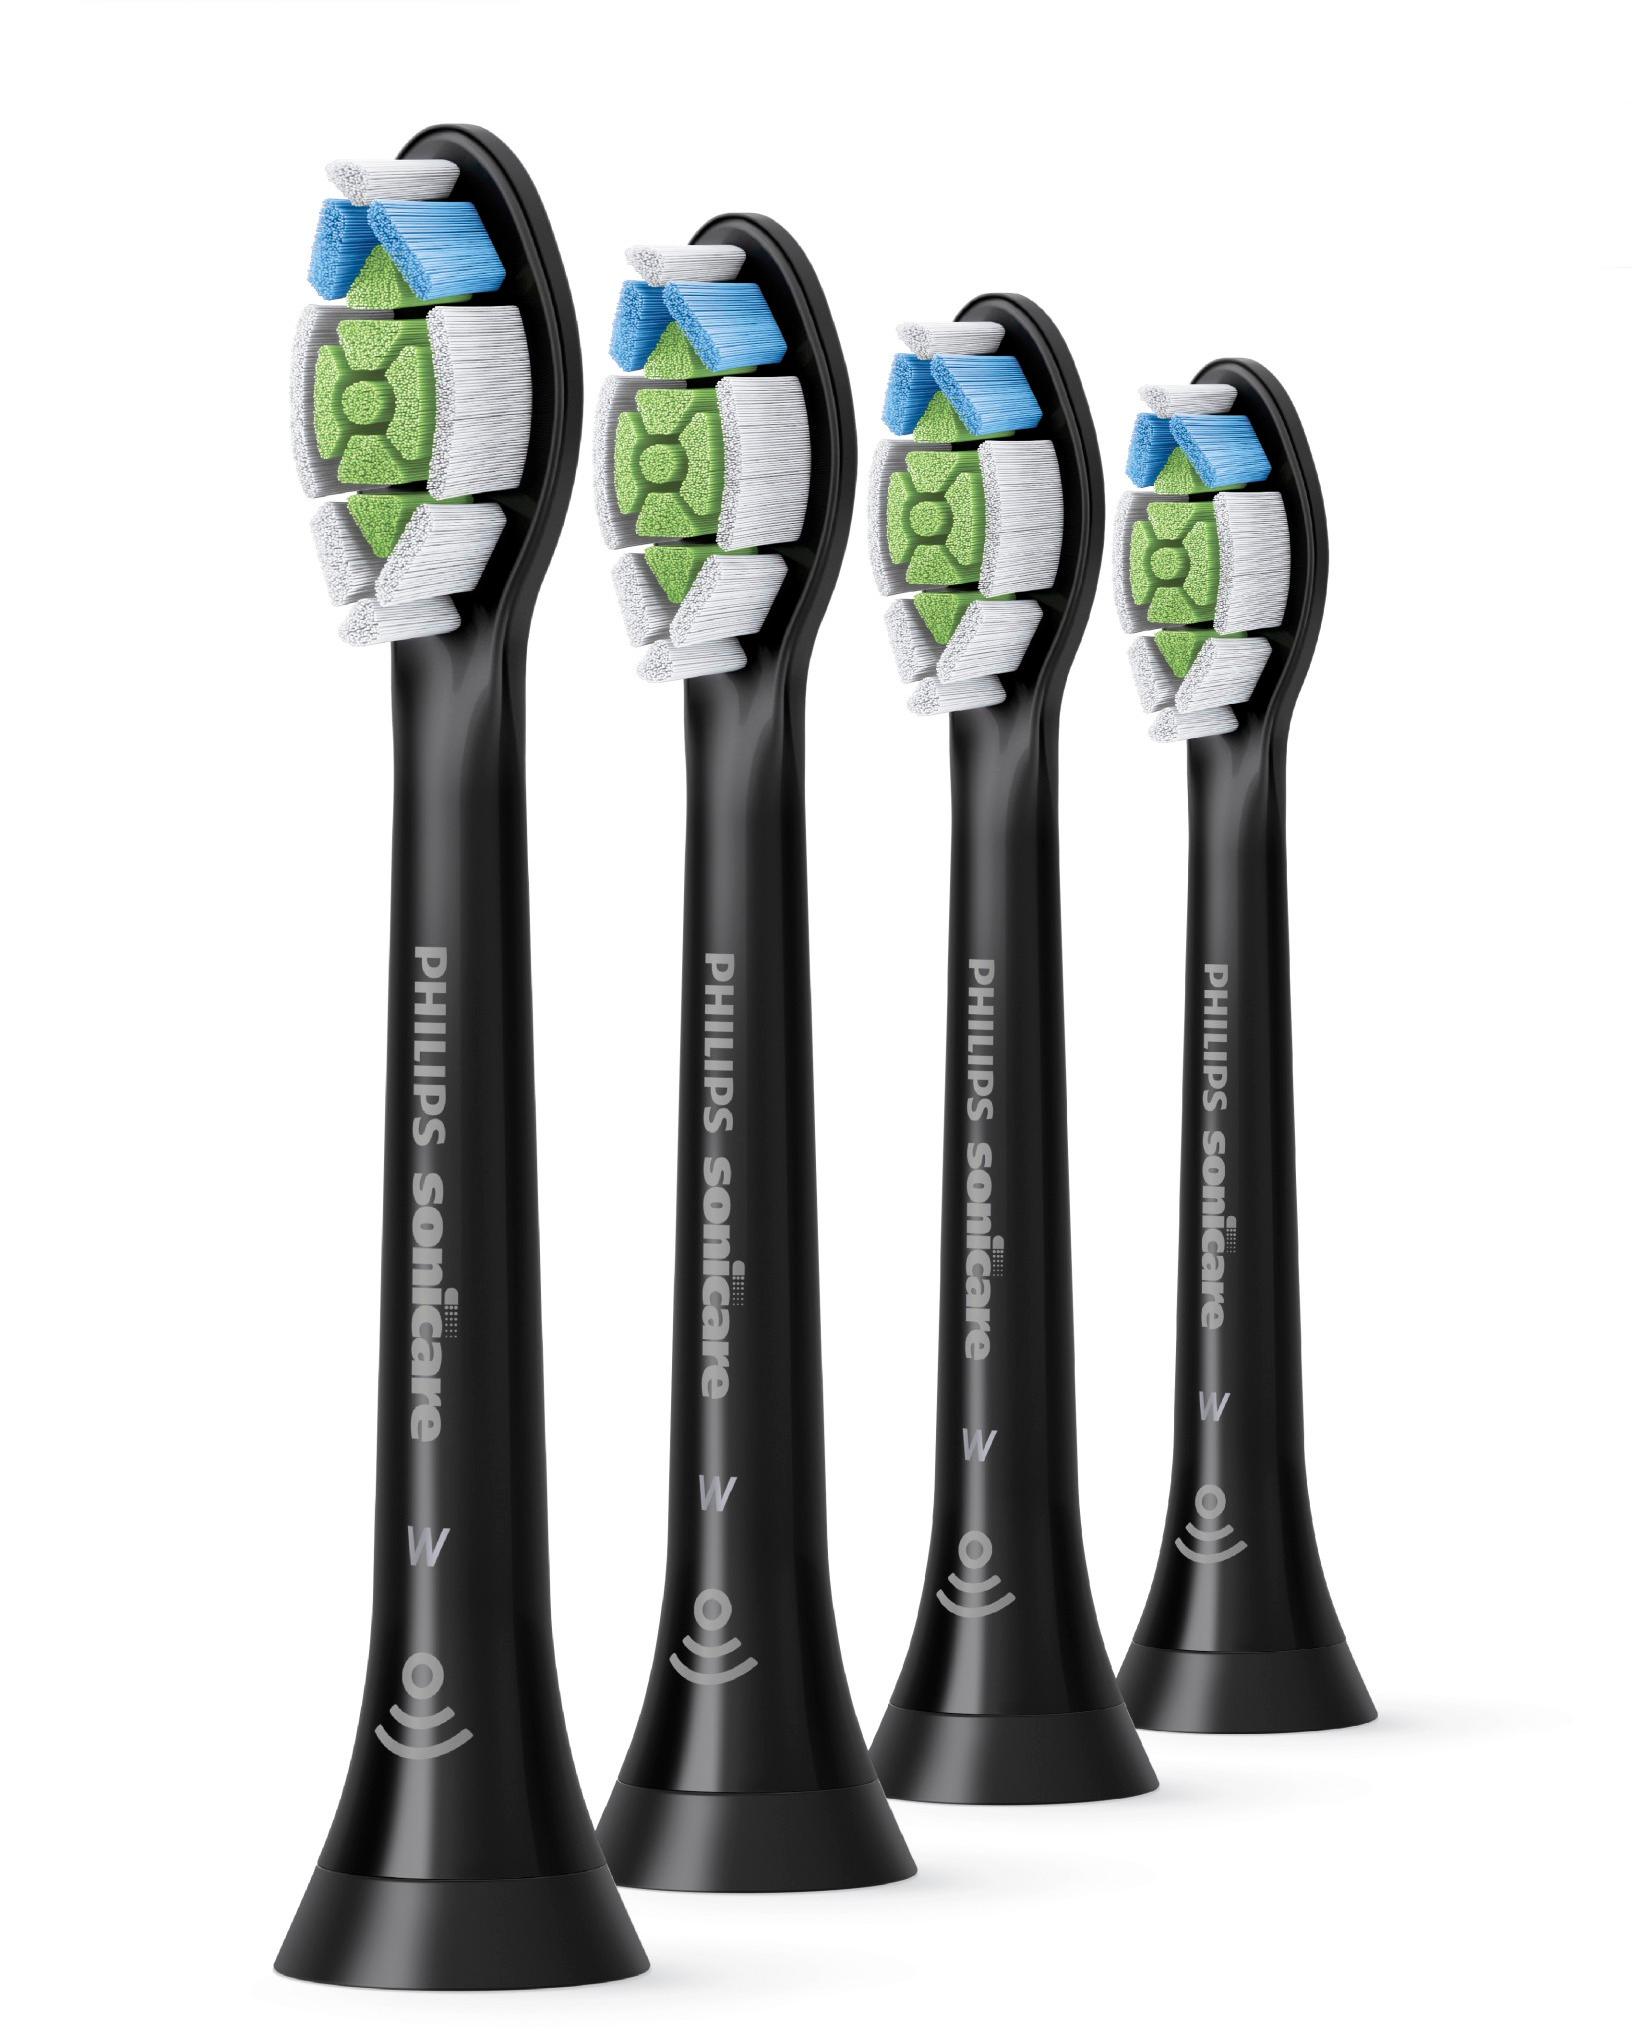 Angle View: Philips Sonicare - DiamondClean Replacement Toothbrush Heads (4-pack) - Black